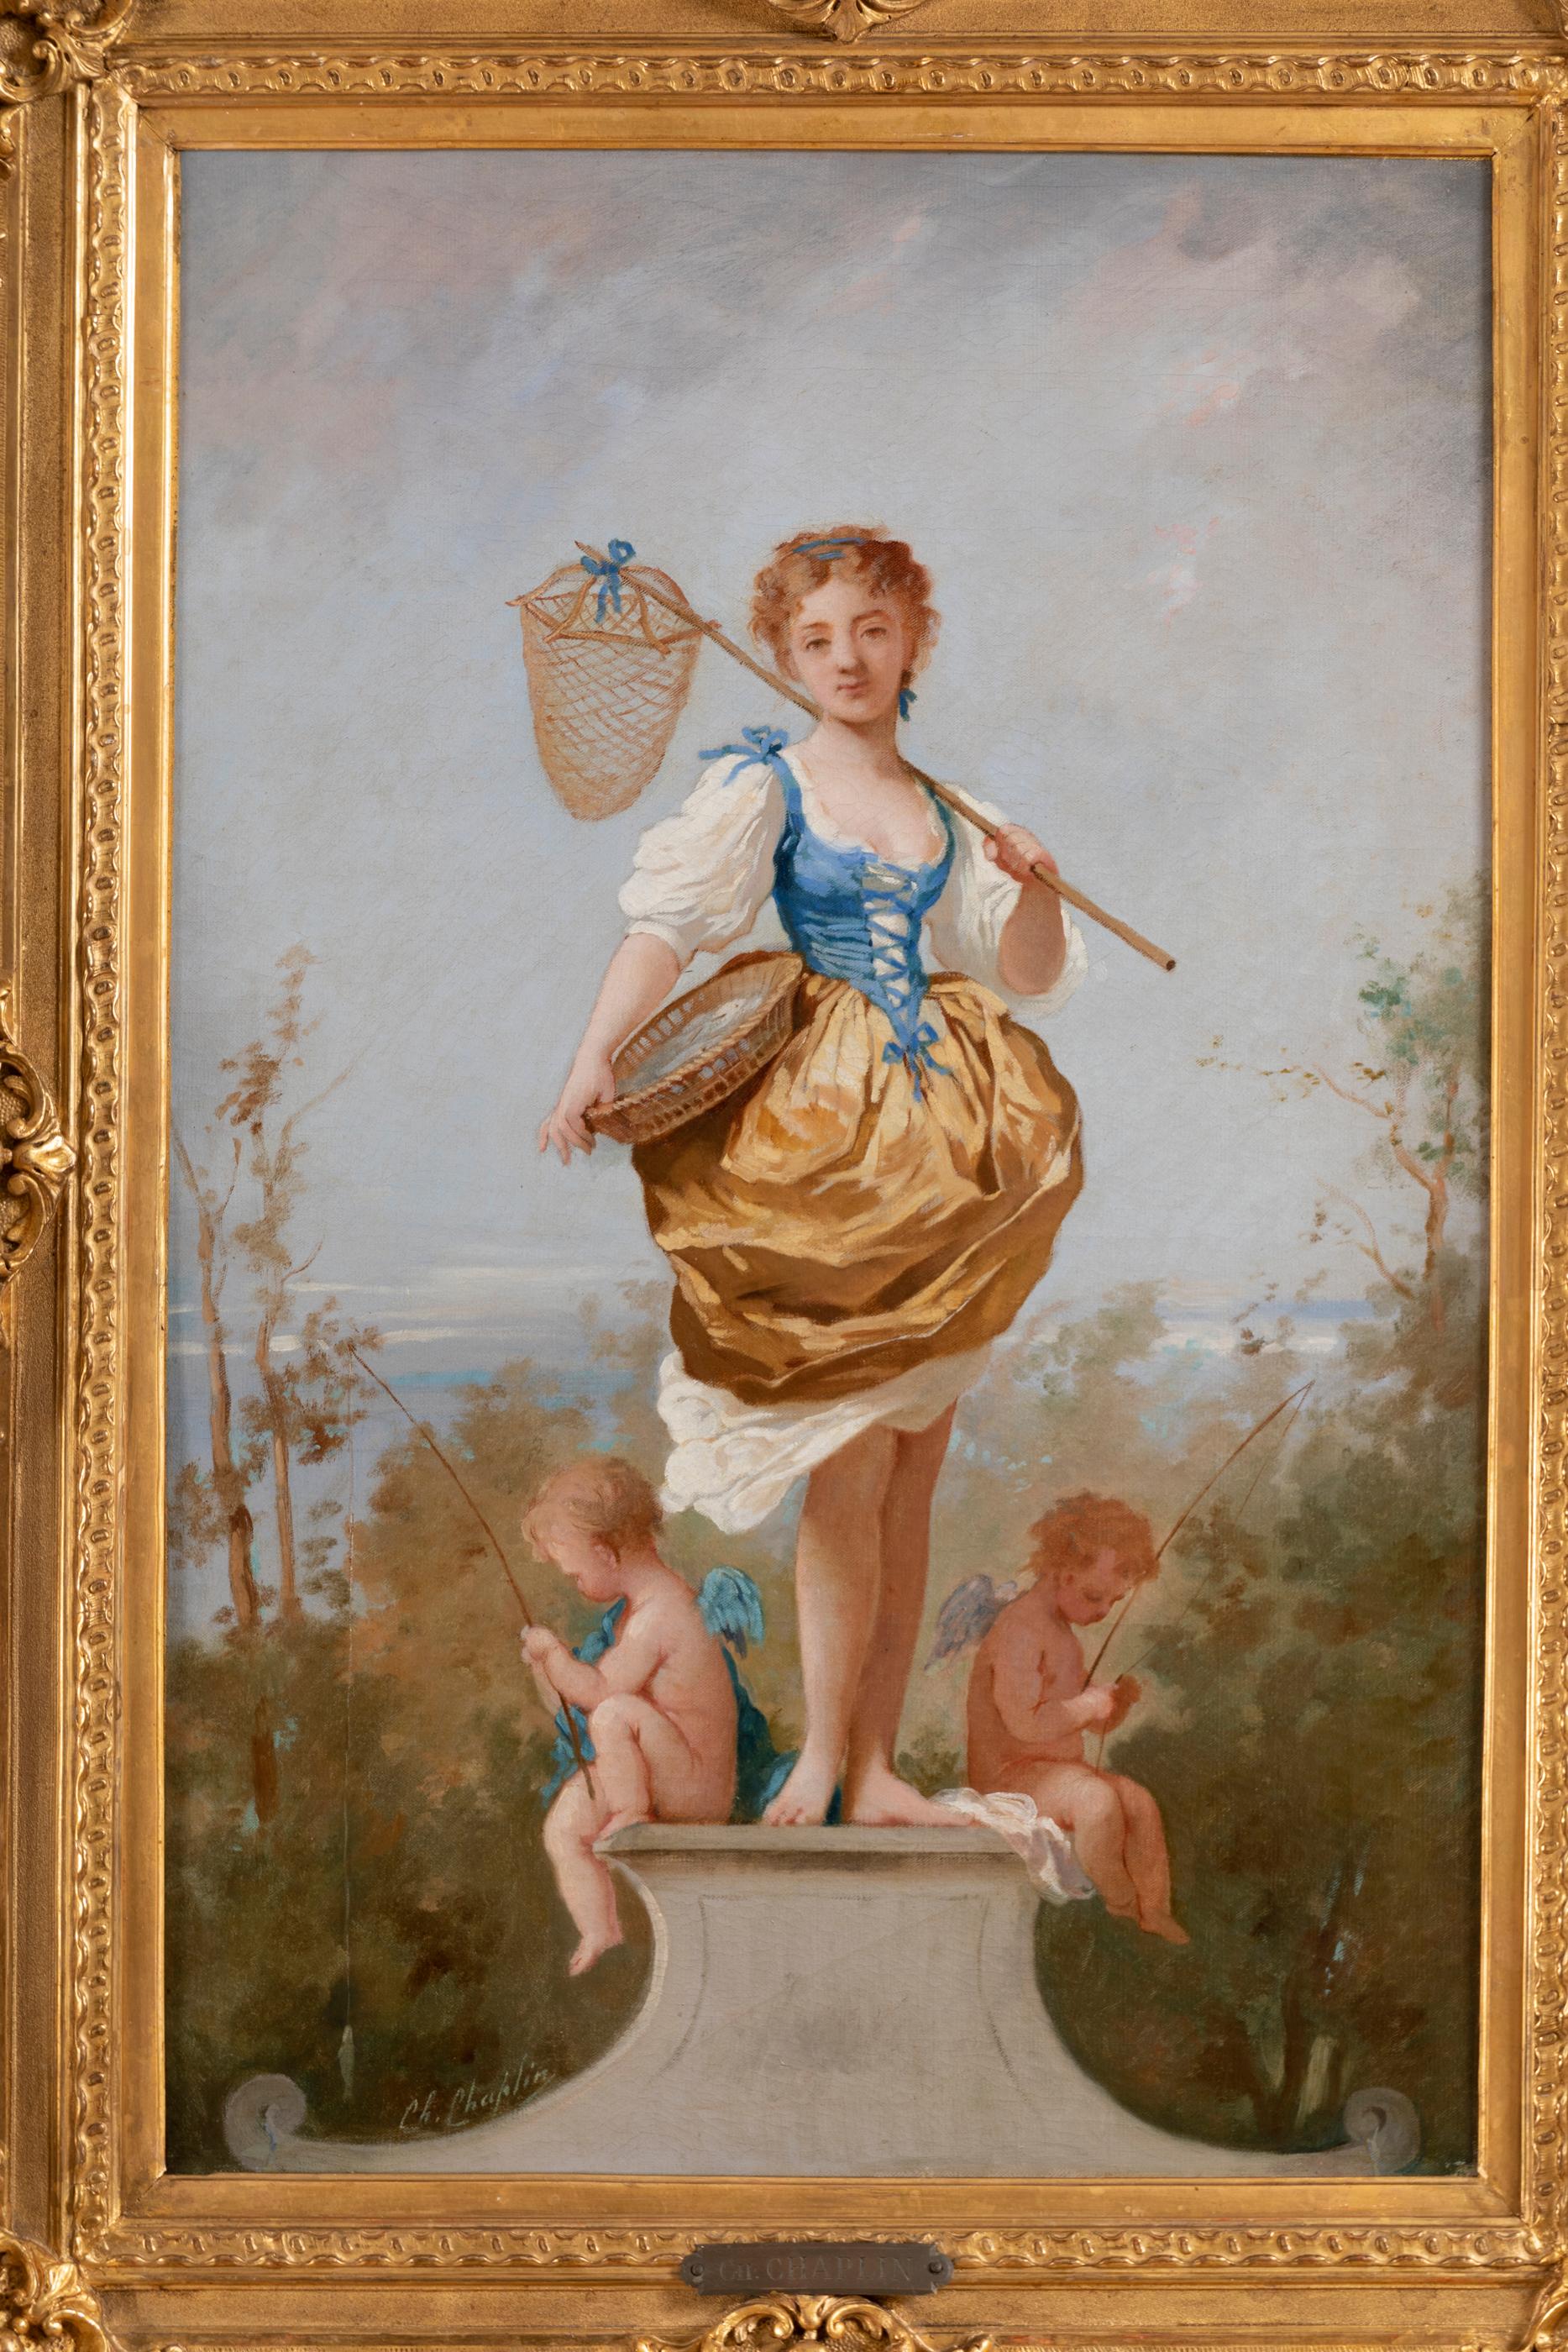 Charles Chaplin (1825-1891) young girl with a net, standing on a base where two fisherman's puttis are held.
Oil on canvas, decorated with a beautiful 19th century frame in Louis XV style.
Signed lower left 